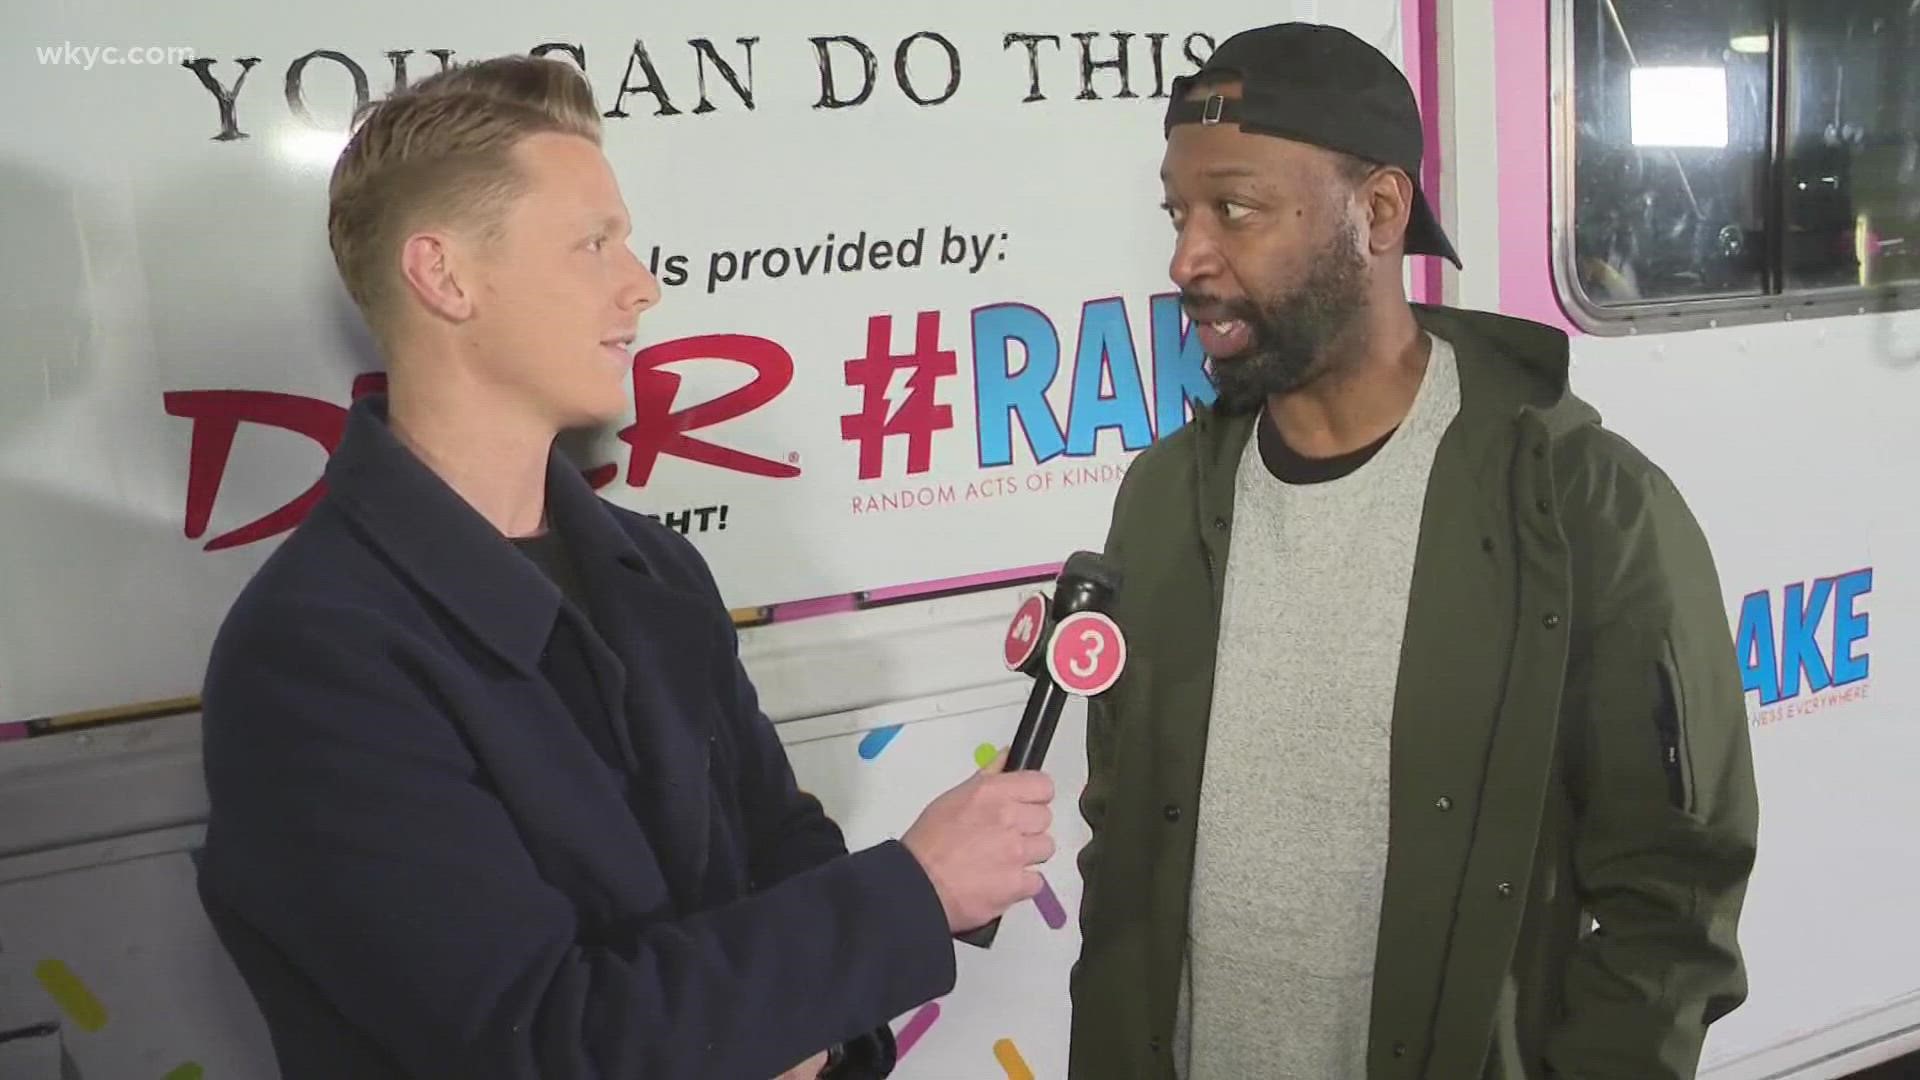 Ricky Smith, the founder of Random Acts of Kindness Everywhere, explains how his team is helping the community during the NBA All-Star Game weekend in Cleveland.